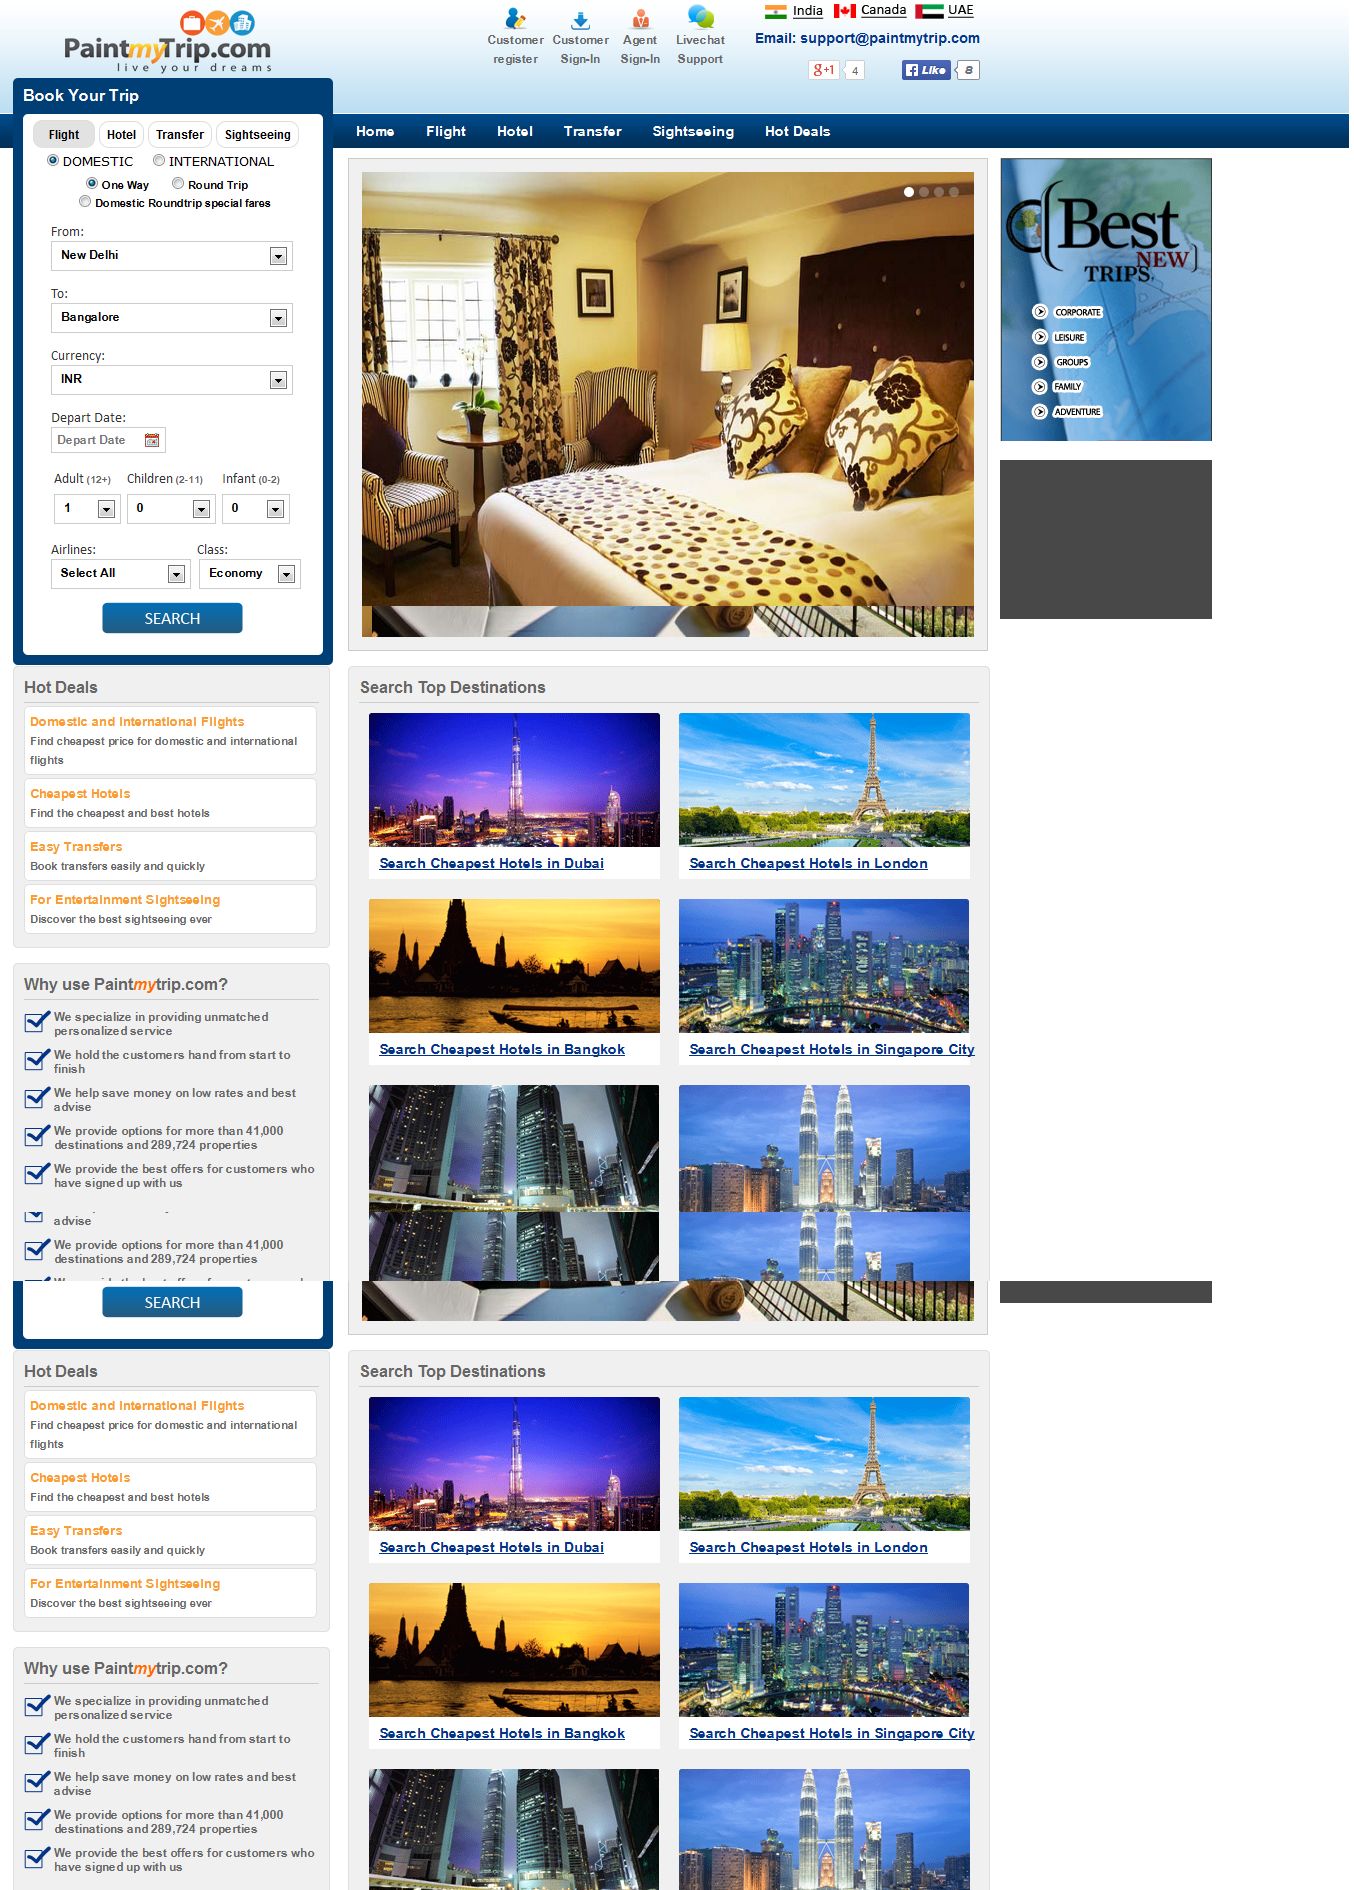 Travel Software, Online Travel Solutions